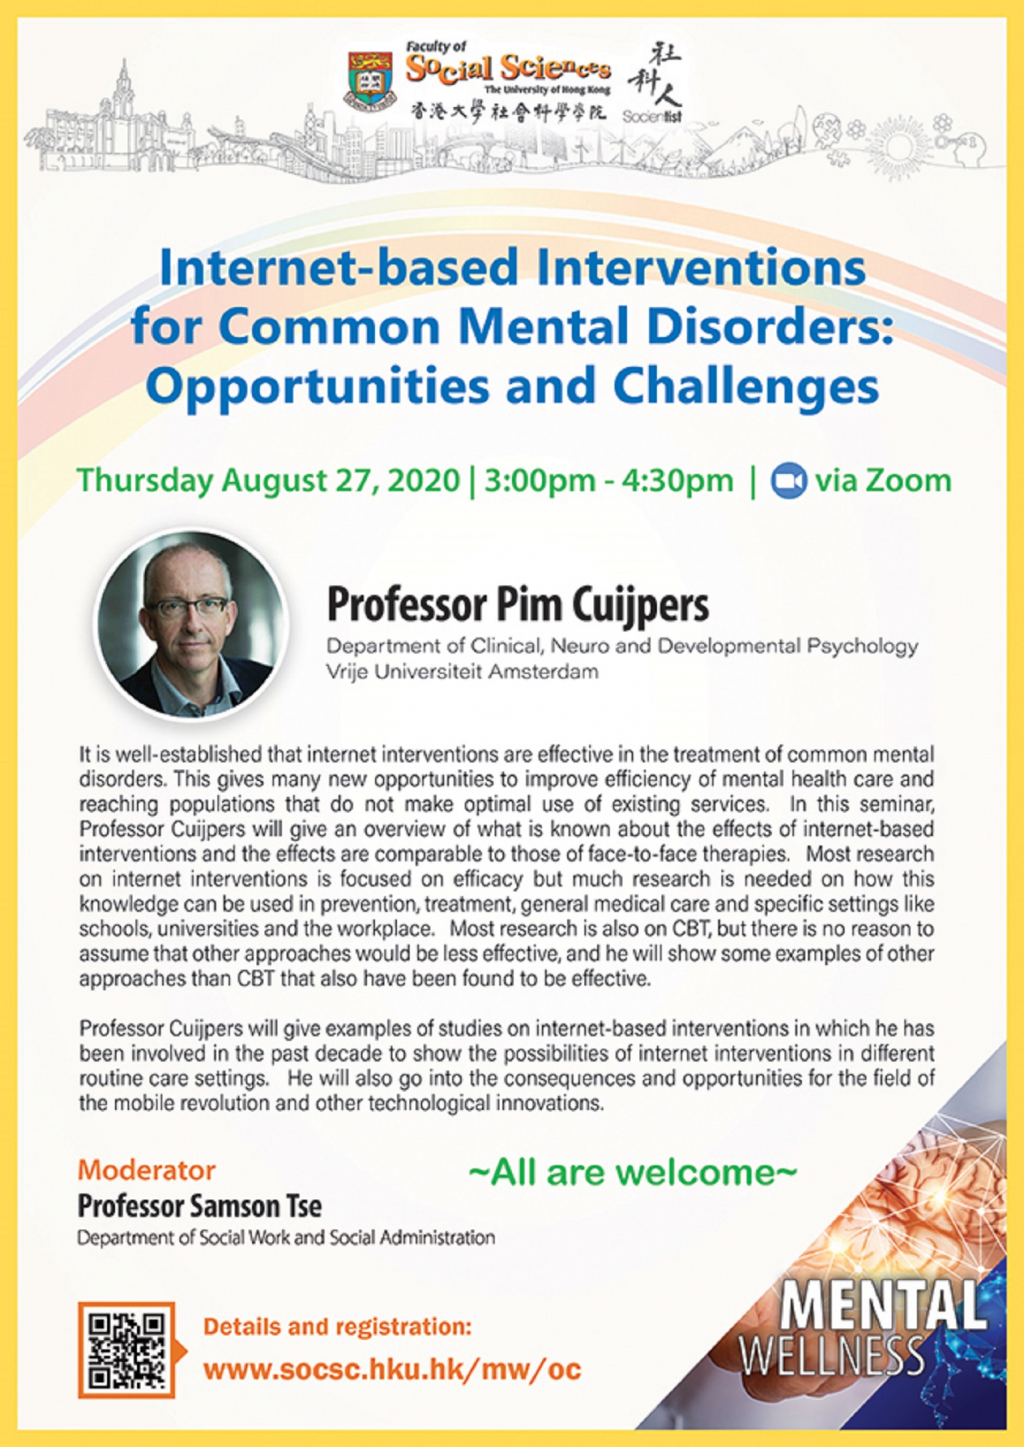 Mental Wellness Seminar on Internet-based Interventions for Common Mental Disorders: Opportunities and Challenges (August 27, 3:00pm)